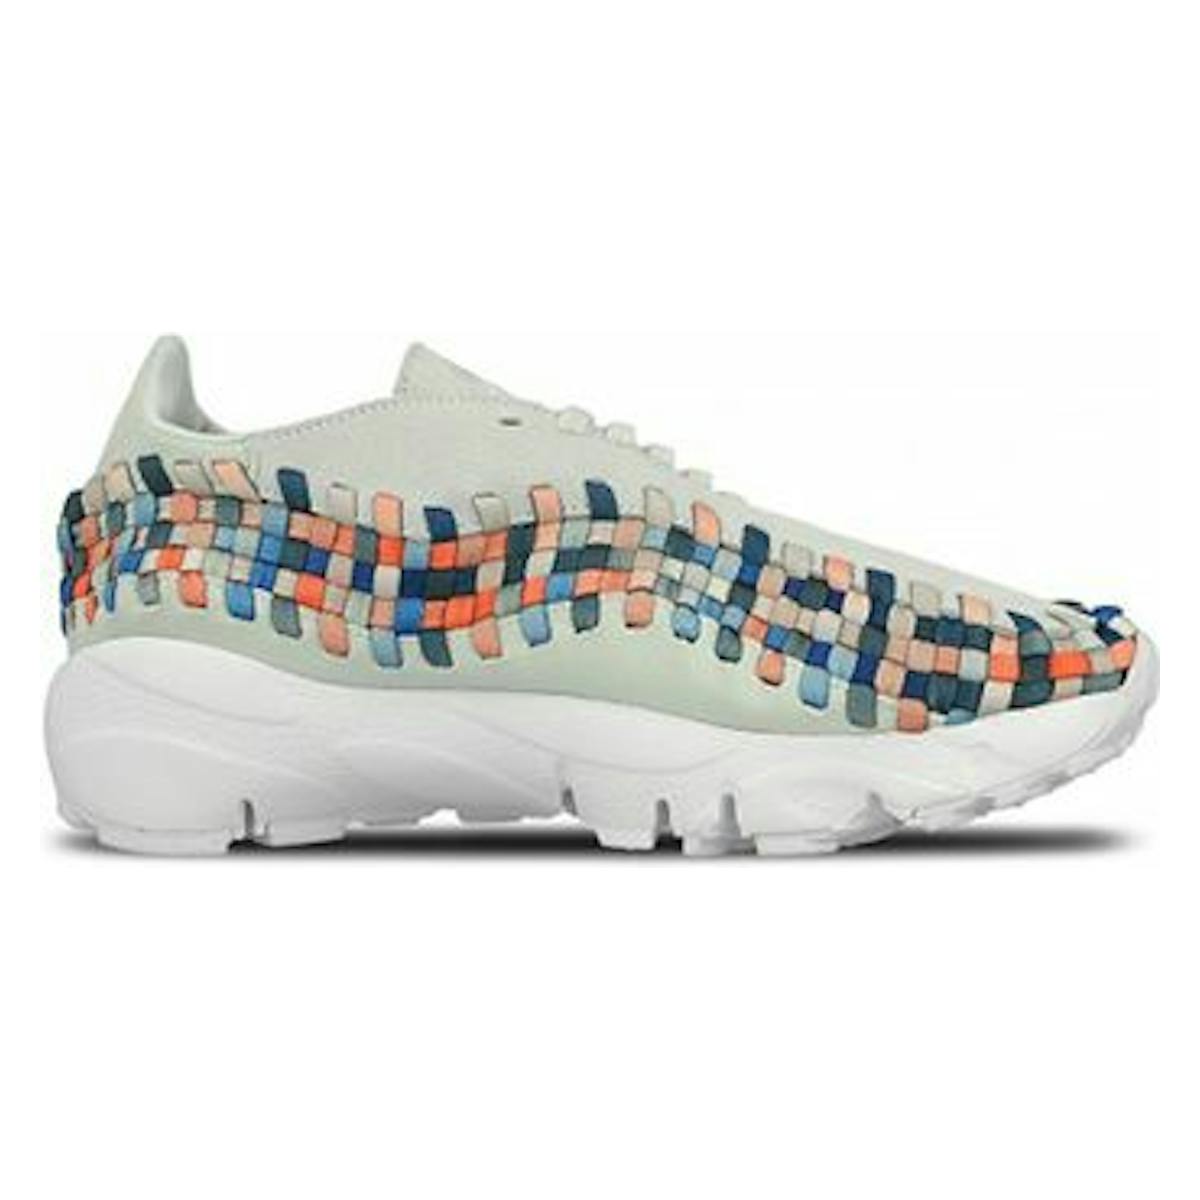 Nike Wmns Air Footscape Woven Moon Particle